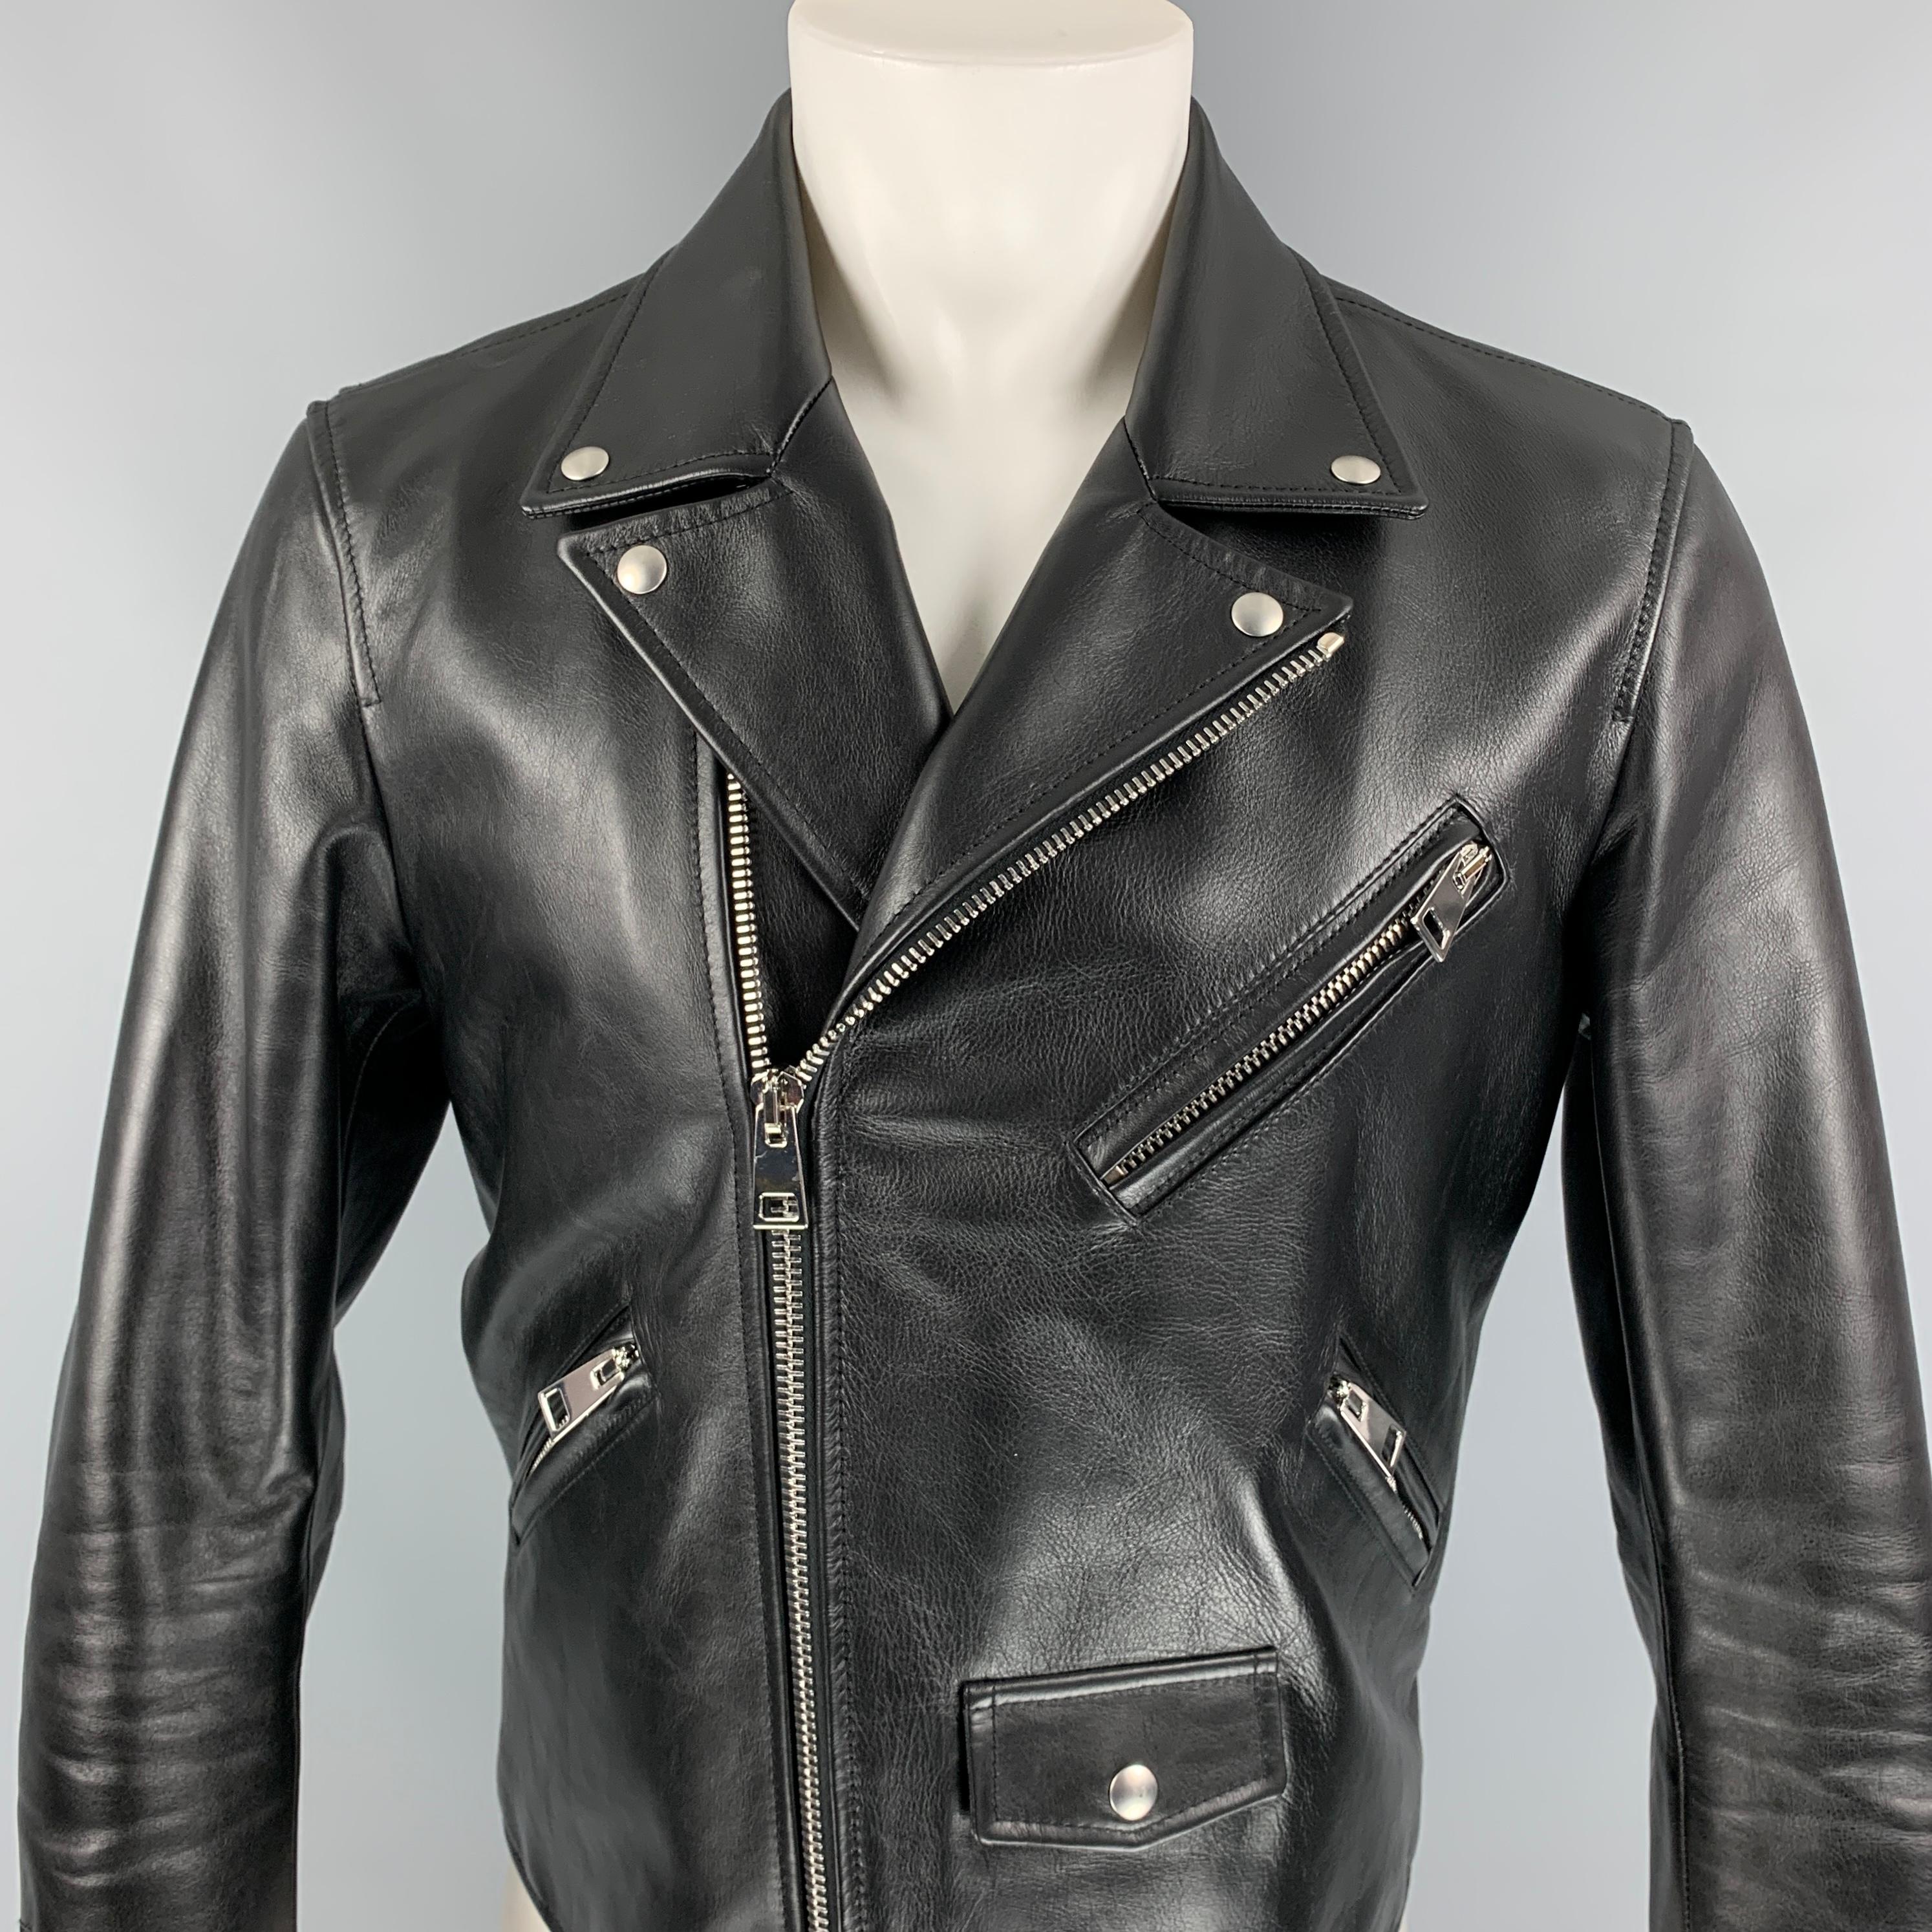 BOTTEGA VENETA by DANIEL LEE Pre-Fall 2019 jacket comes in a black calf leather with a quilted liner featuring a biker style, silver tone hardware, zipper sleeves, front pockets, and a zip up closure. Made in Italy. 

Excellent Pre-Owned